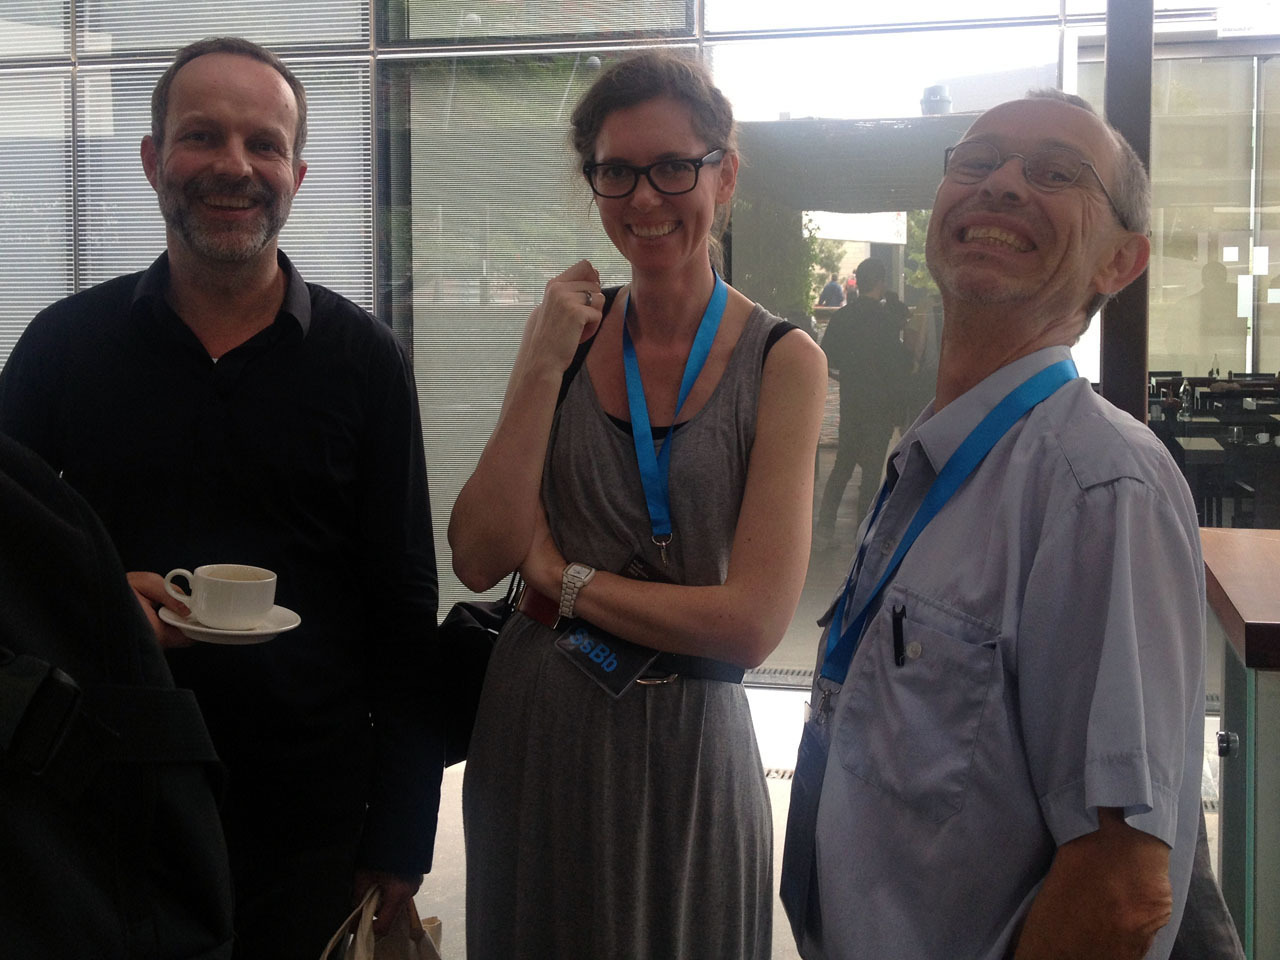 … and happy encounters in the breaks (here Sofie Beier with Danish colleagues).